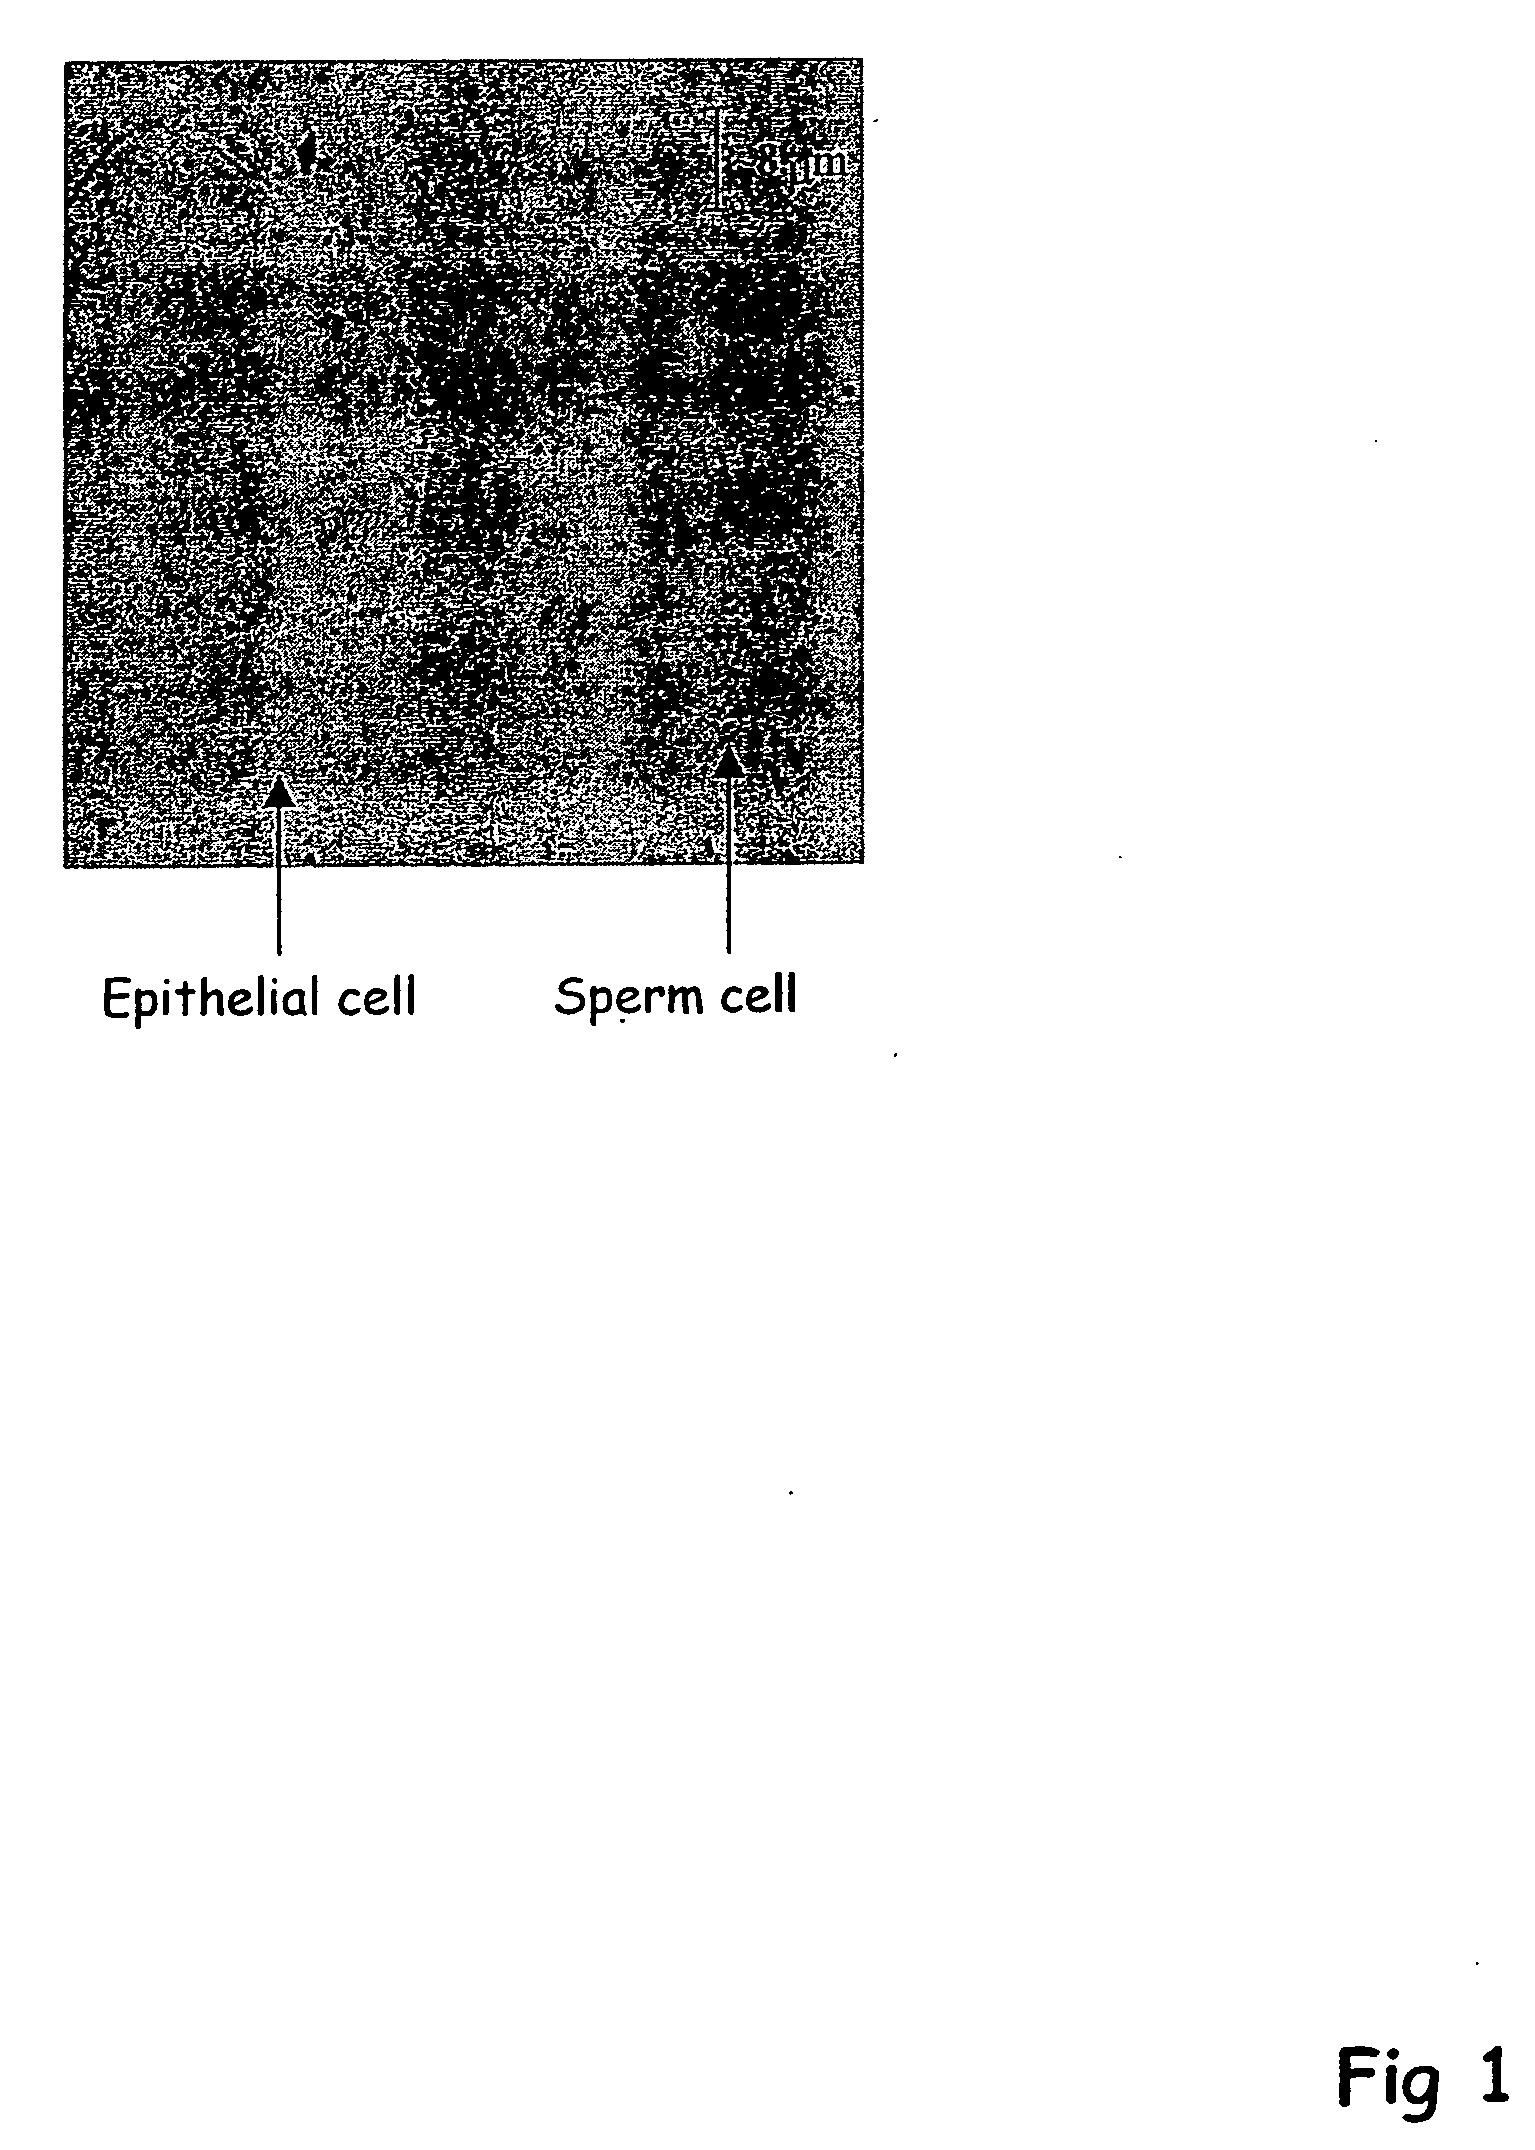 Isolation of sperm cells from other biological materials using microfabricated devices and related methods thereof